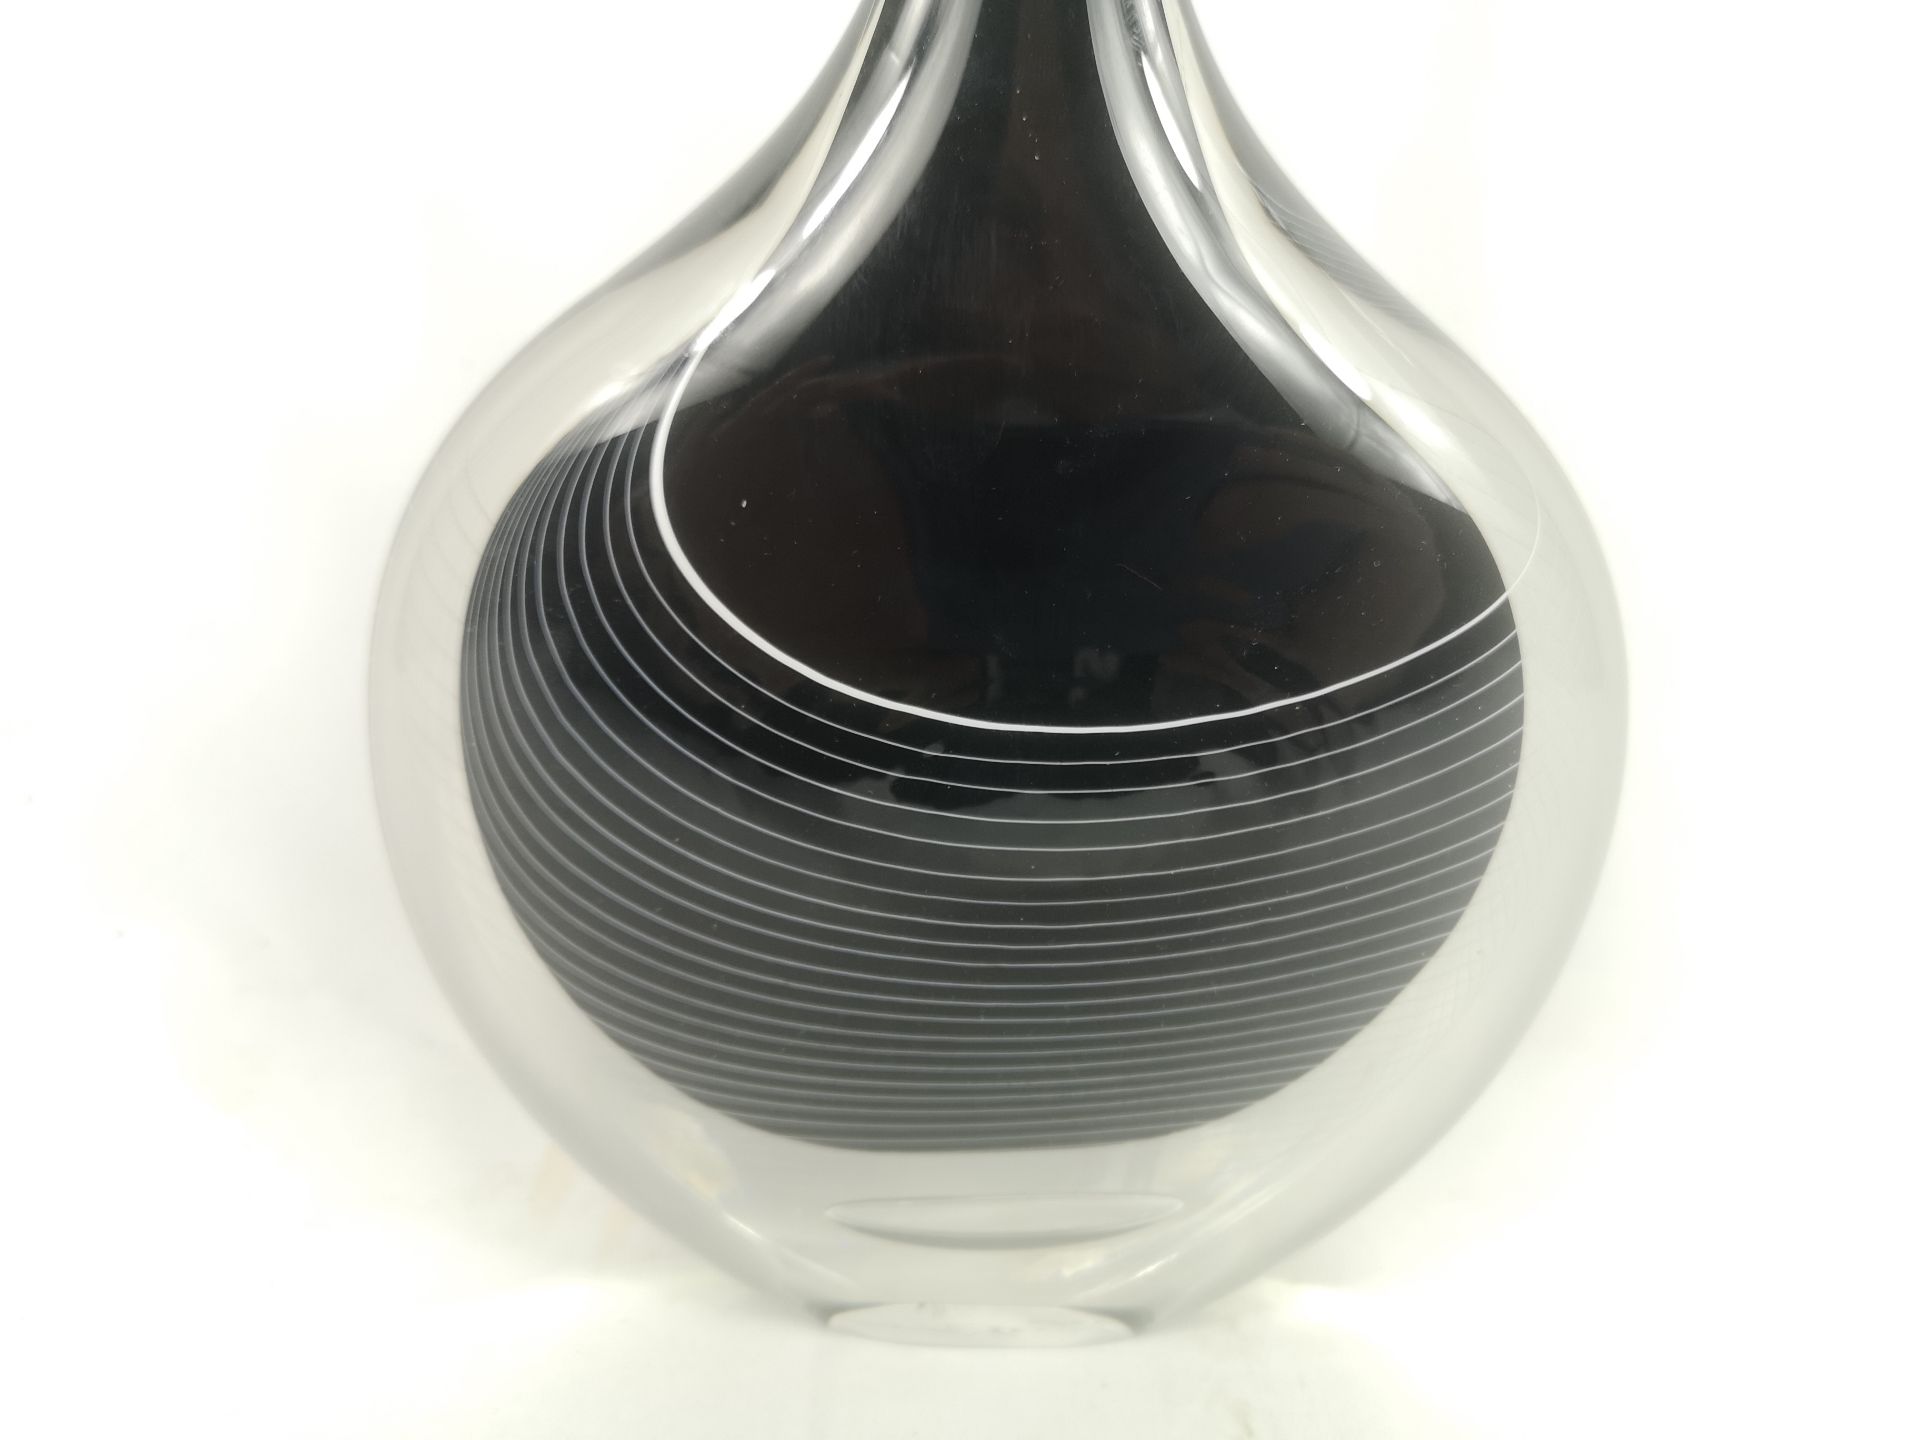 Art glass vase, signed by artist Katie Brown - Image 2 of 4